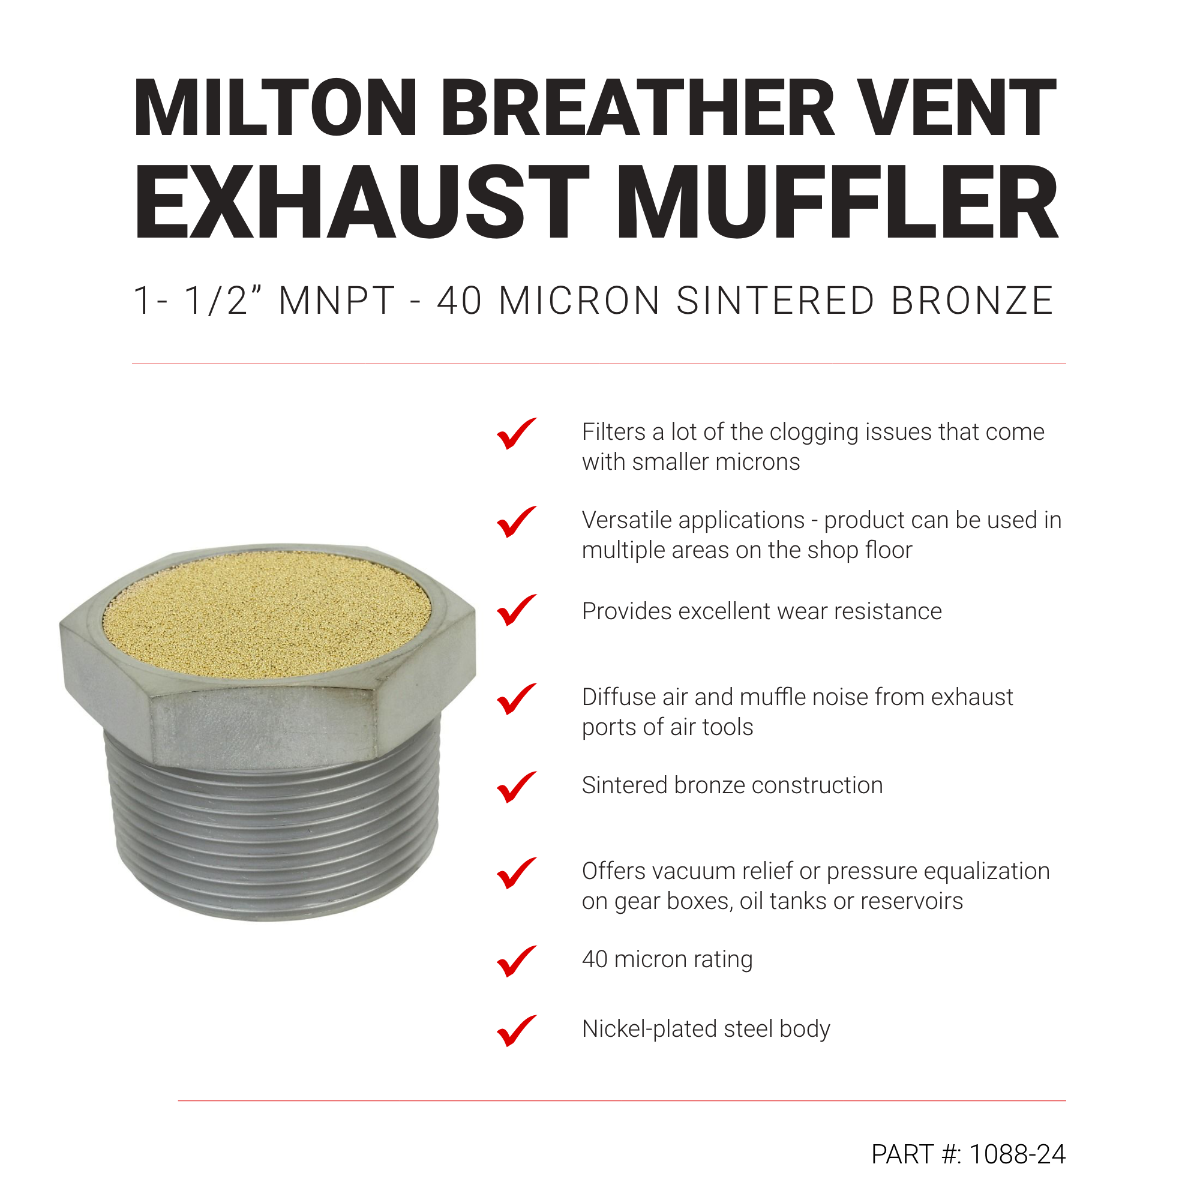 Breather Vent Pneumatic Muffler, 1- 1/2” MNPT - 40 Micron Sintered Bronze Silencer/Diffuse Air & Noise Reducer